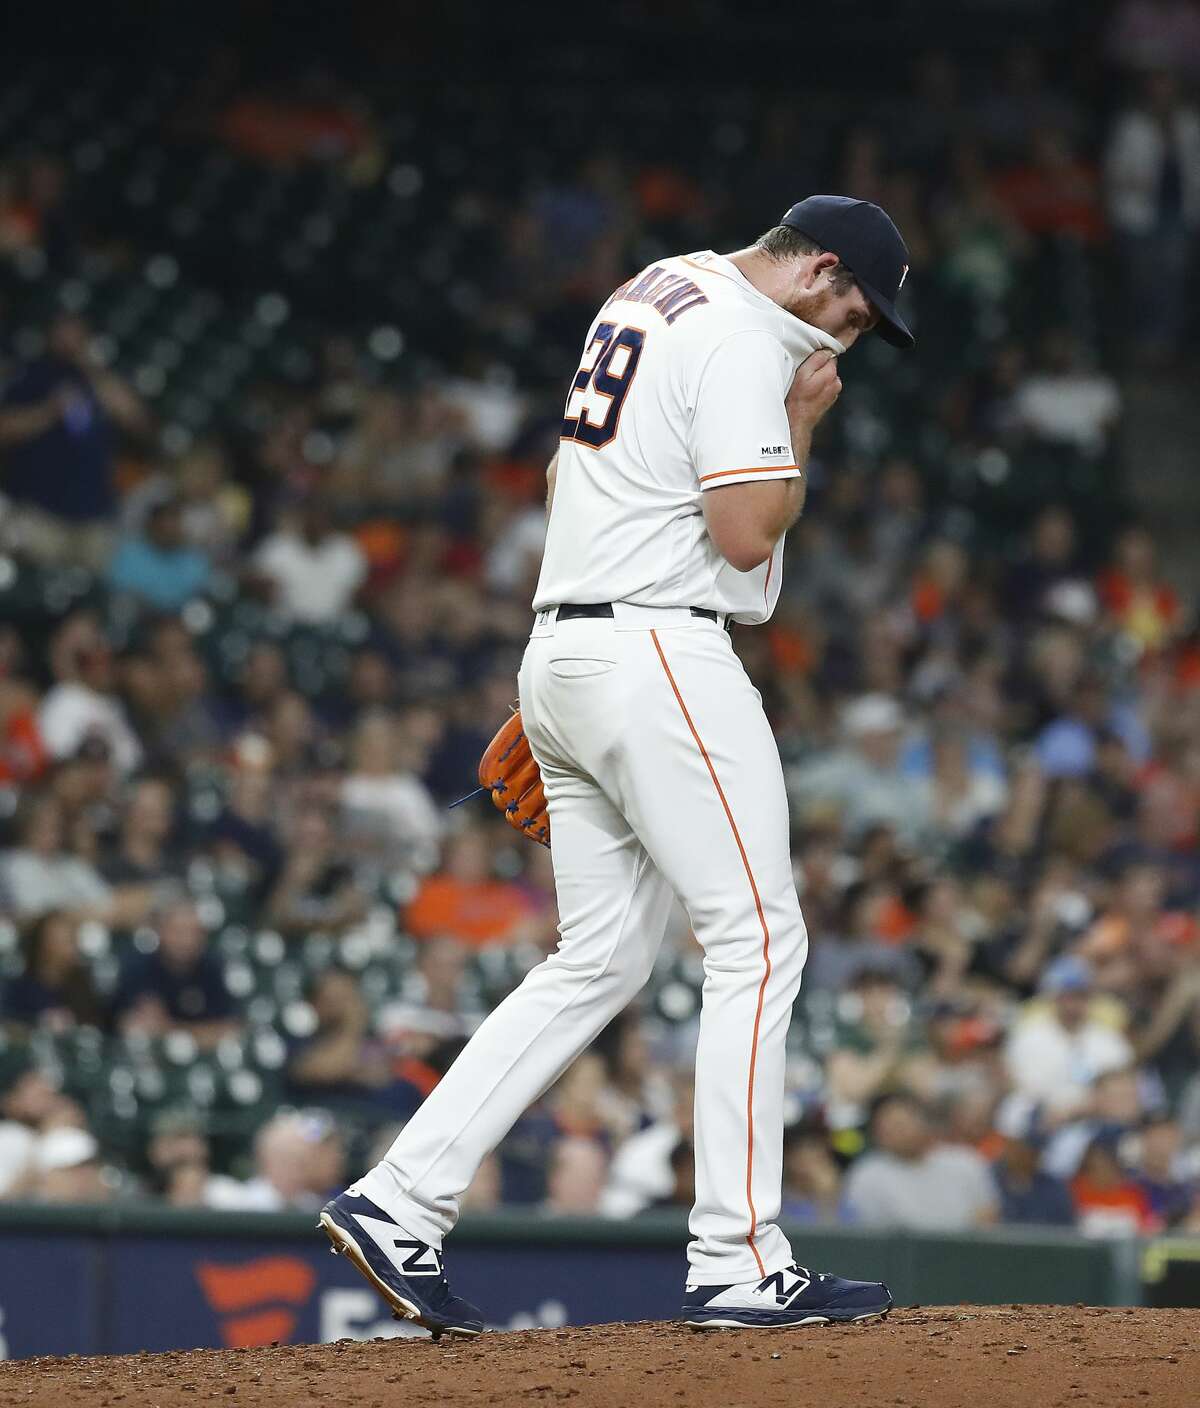 Houston Astros relief pitcher Joe Biagini (29) reacts after giving up a two-run home run to Oakland Athletics Marcus Semien during the fourth inning of a MLB baseball game at Minute Maid Park, Tuesday, Sept. 10, 2019, in Houston.